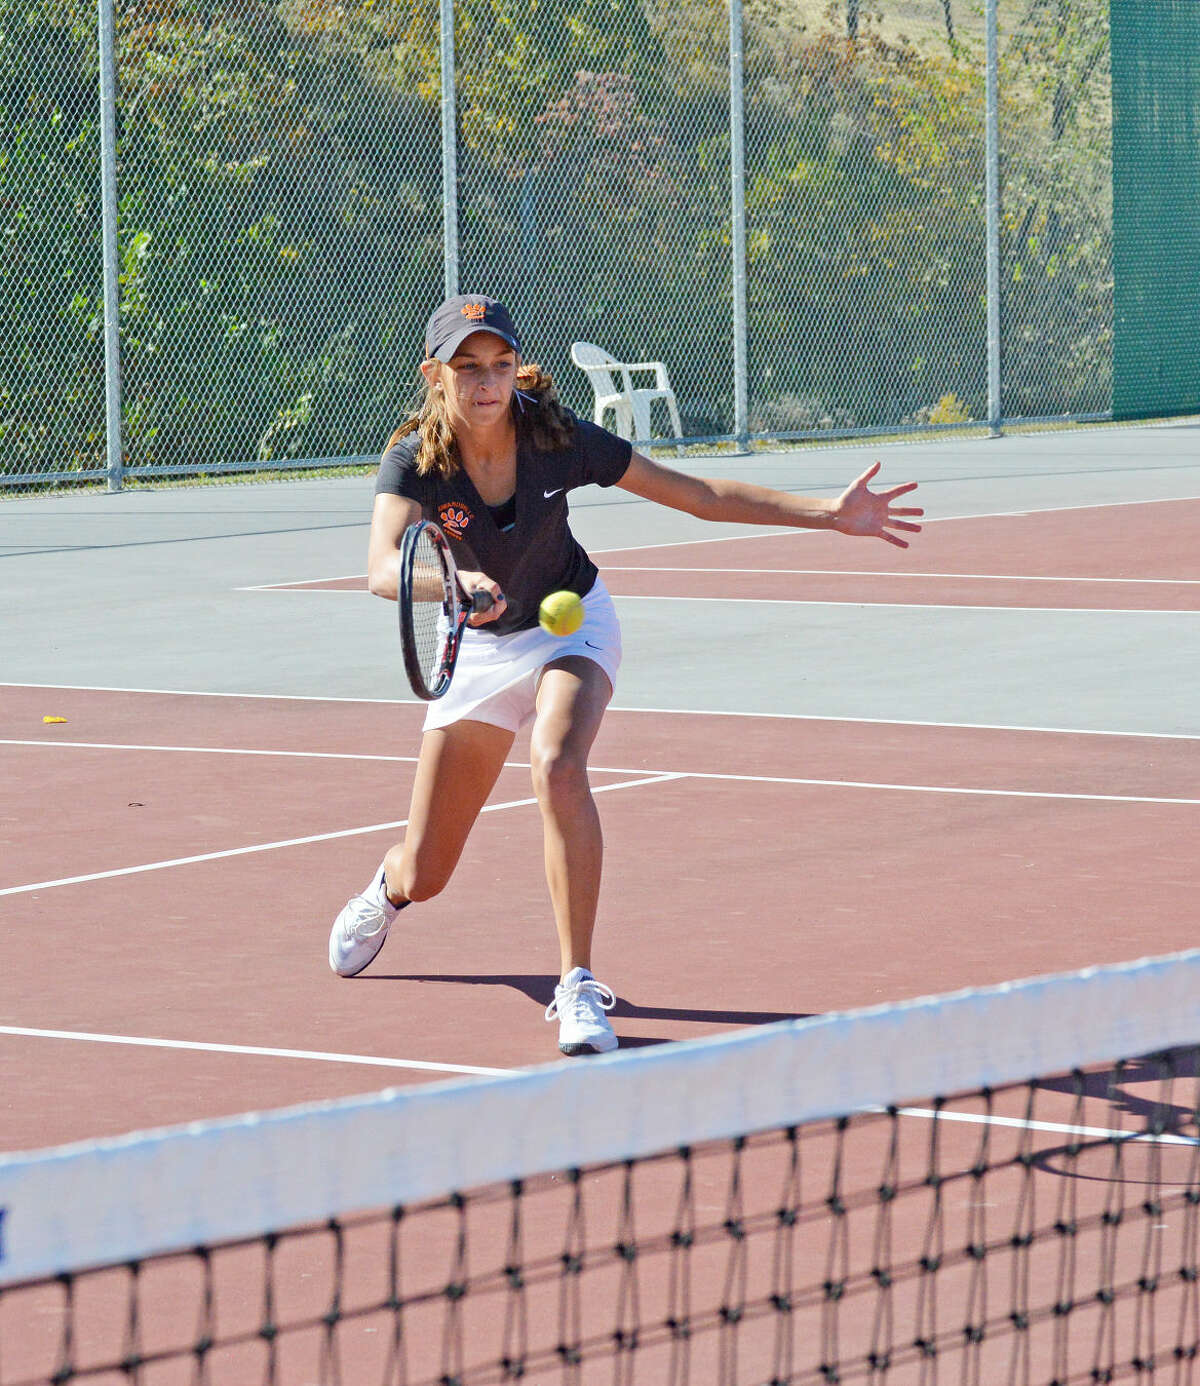 Edwardsville junior Maria Mezo hits a forehand shot at the net during her doubles match in the Alton Sectional.